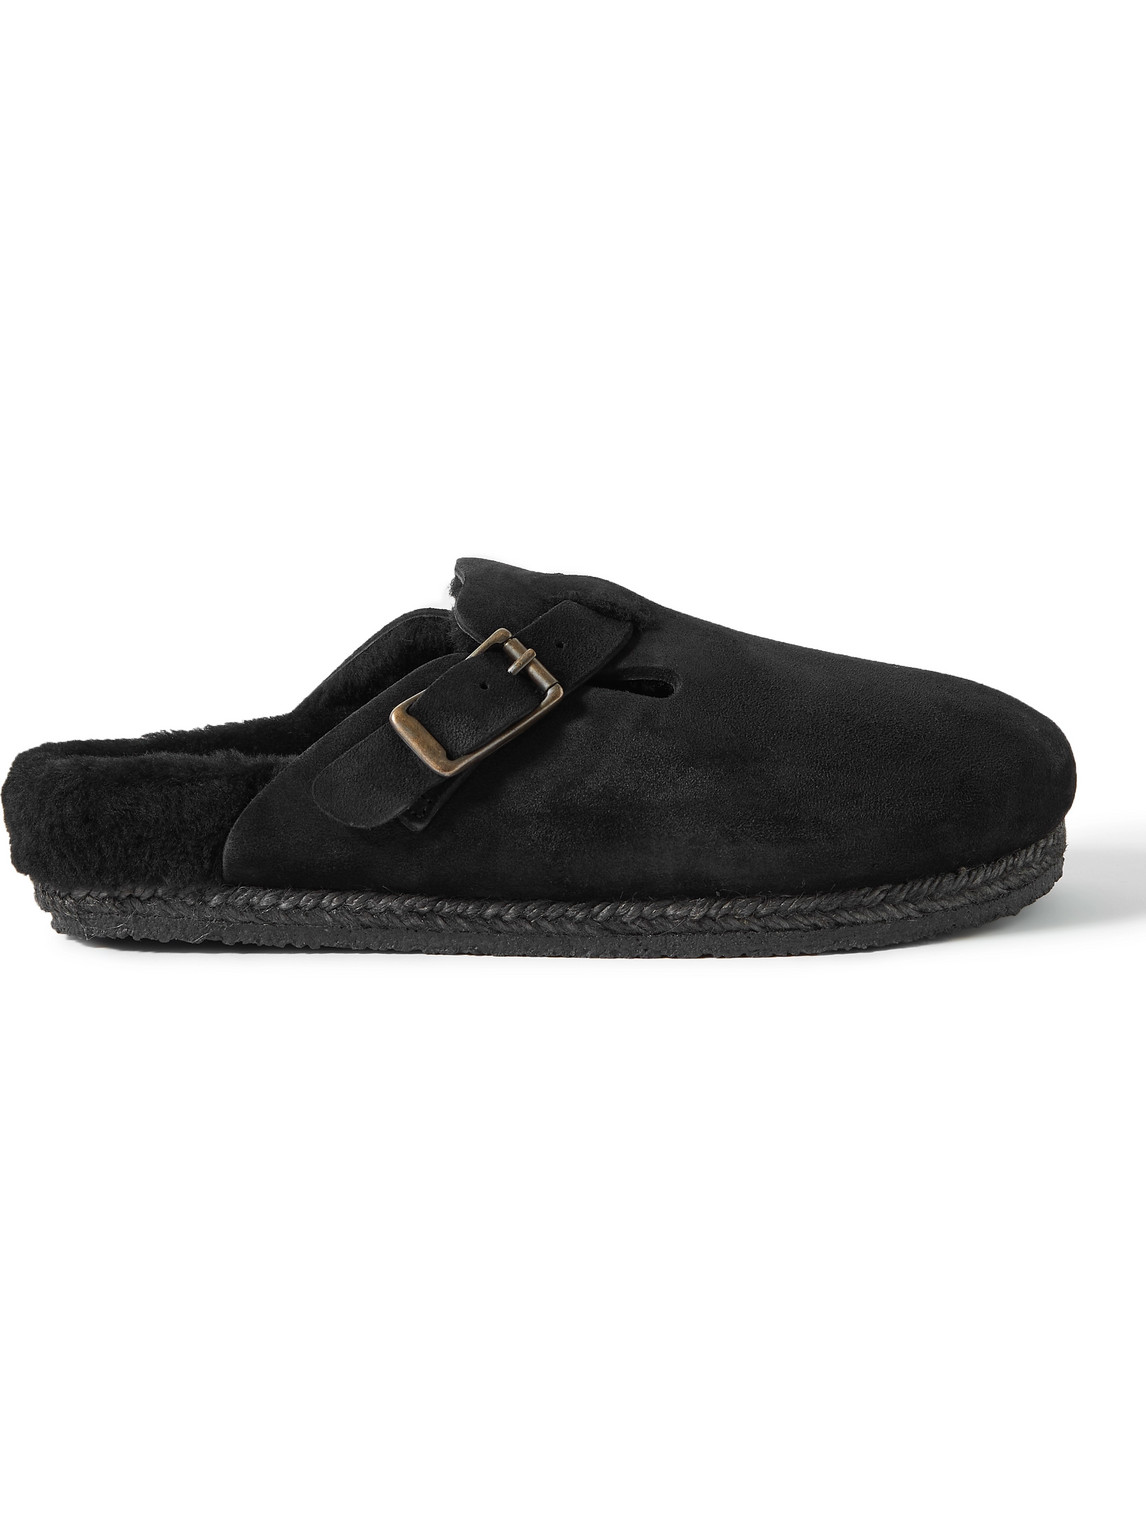 Sal-1 Shearling-Lined Suede Sandals